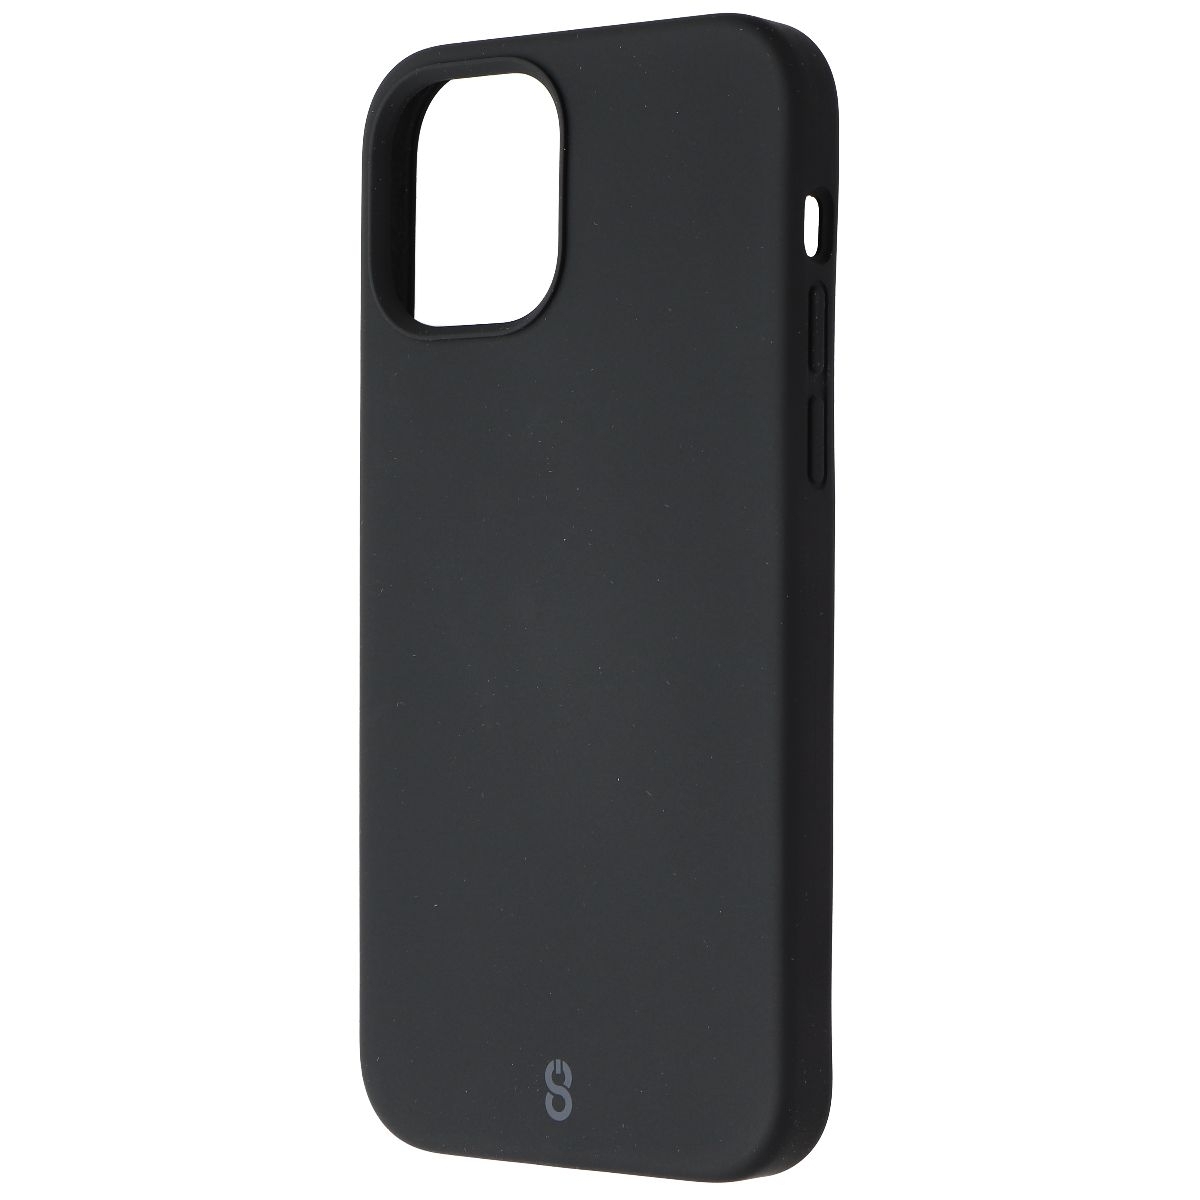 Logiix Silicone Case For Apple IPhone 12 And 12 Pro Smartphones - Black (Refurbished)